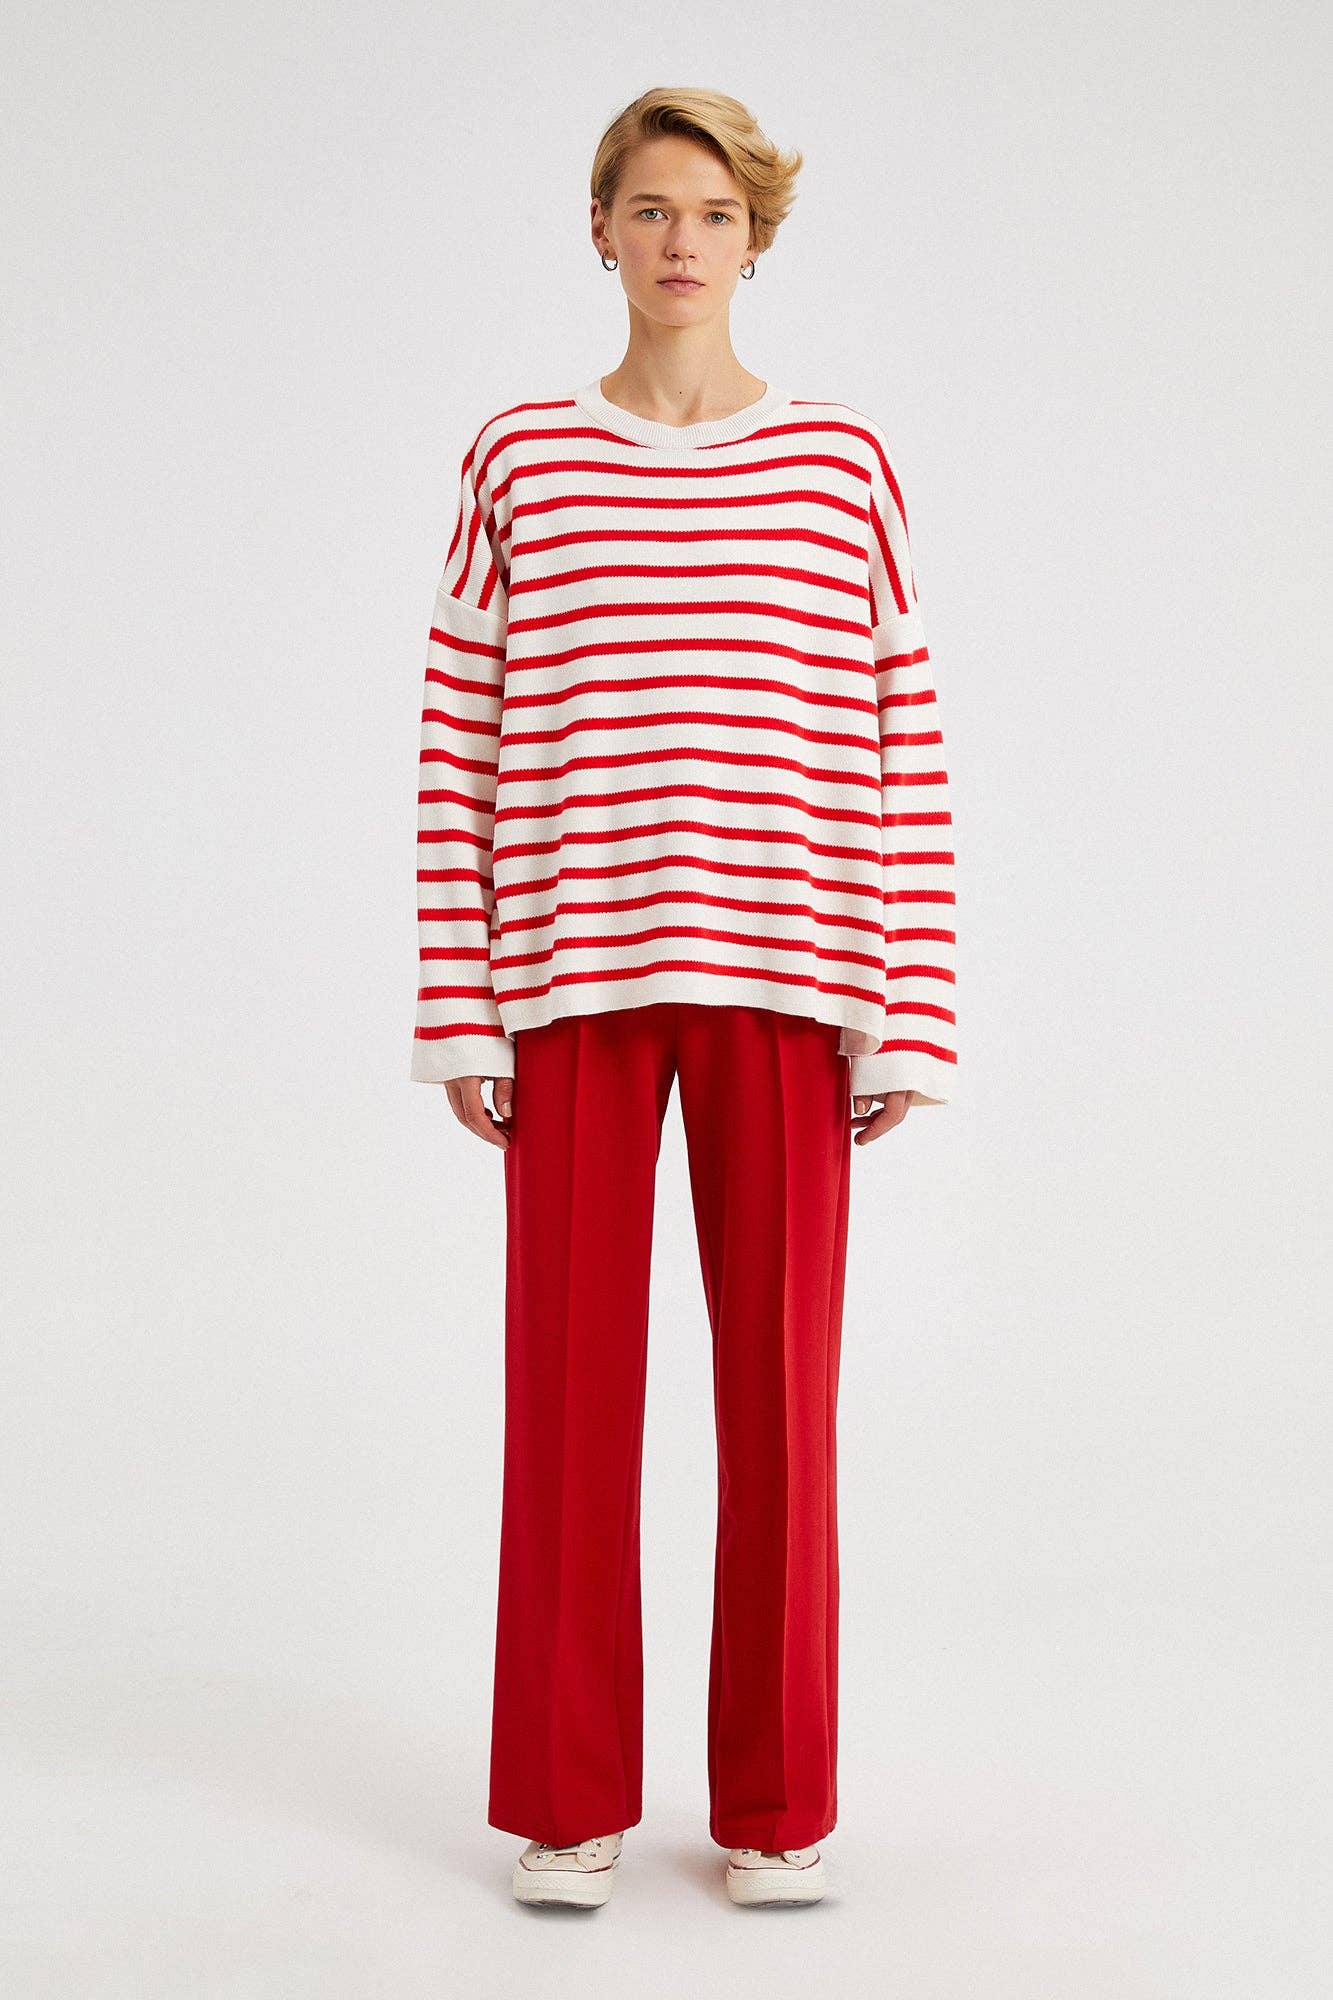 Striped Knit Sweater - Red